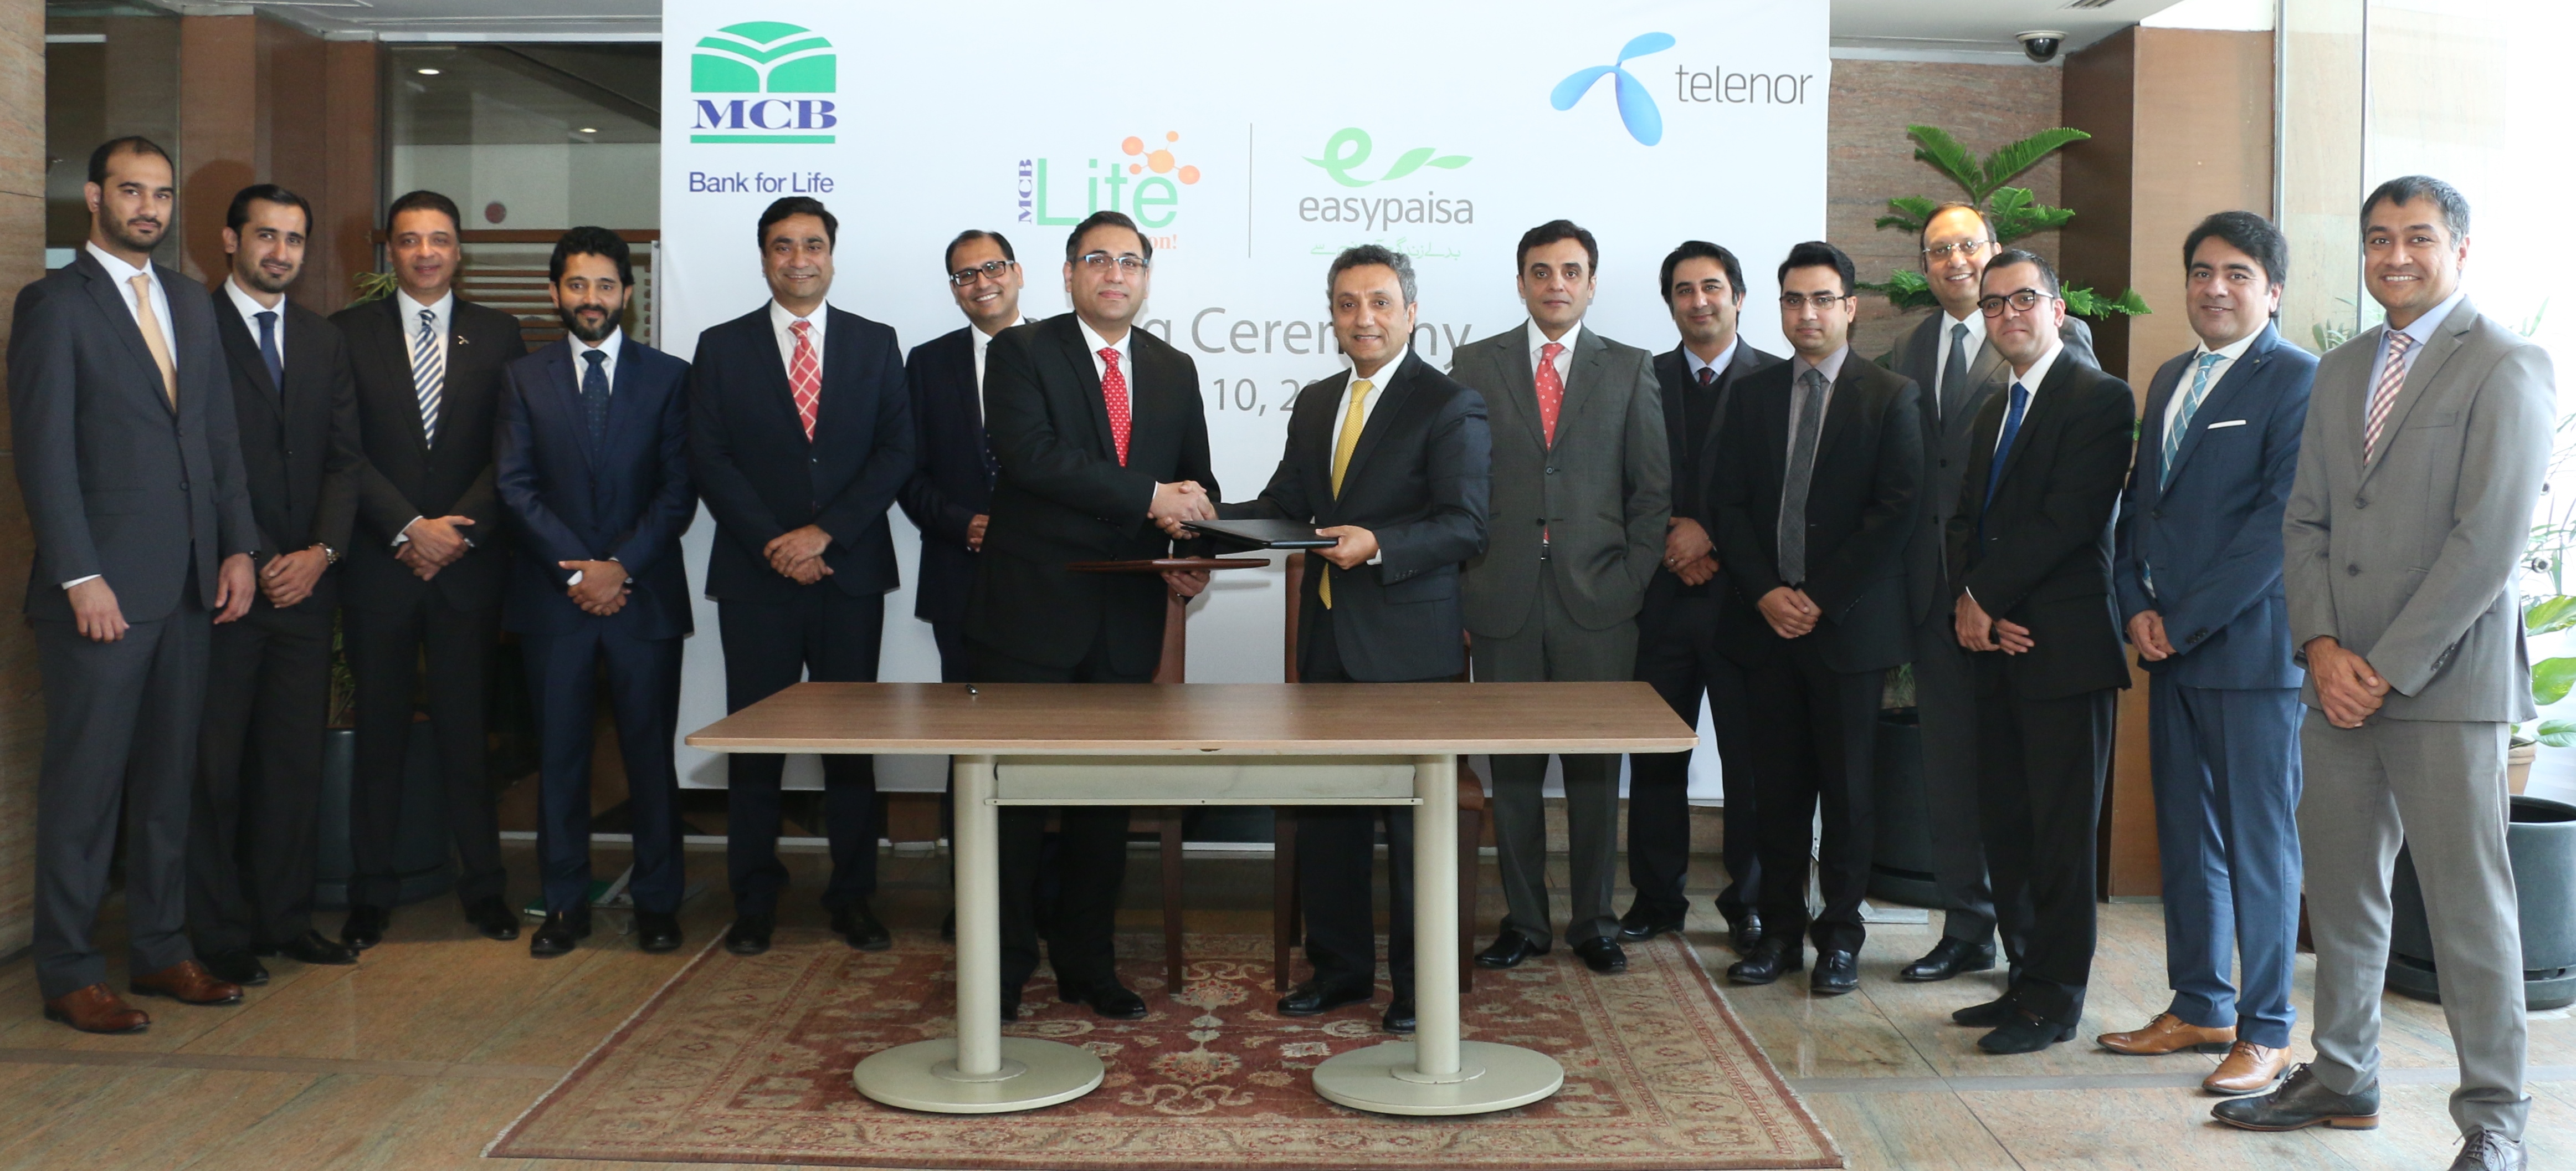 MCB Bank Limited and Telenor Microfinance Bank partner up for Easypaisa agent network accessibility